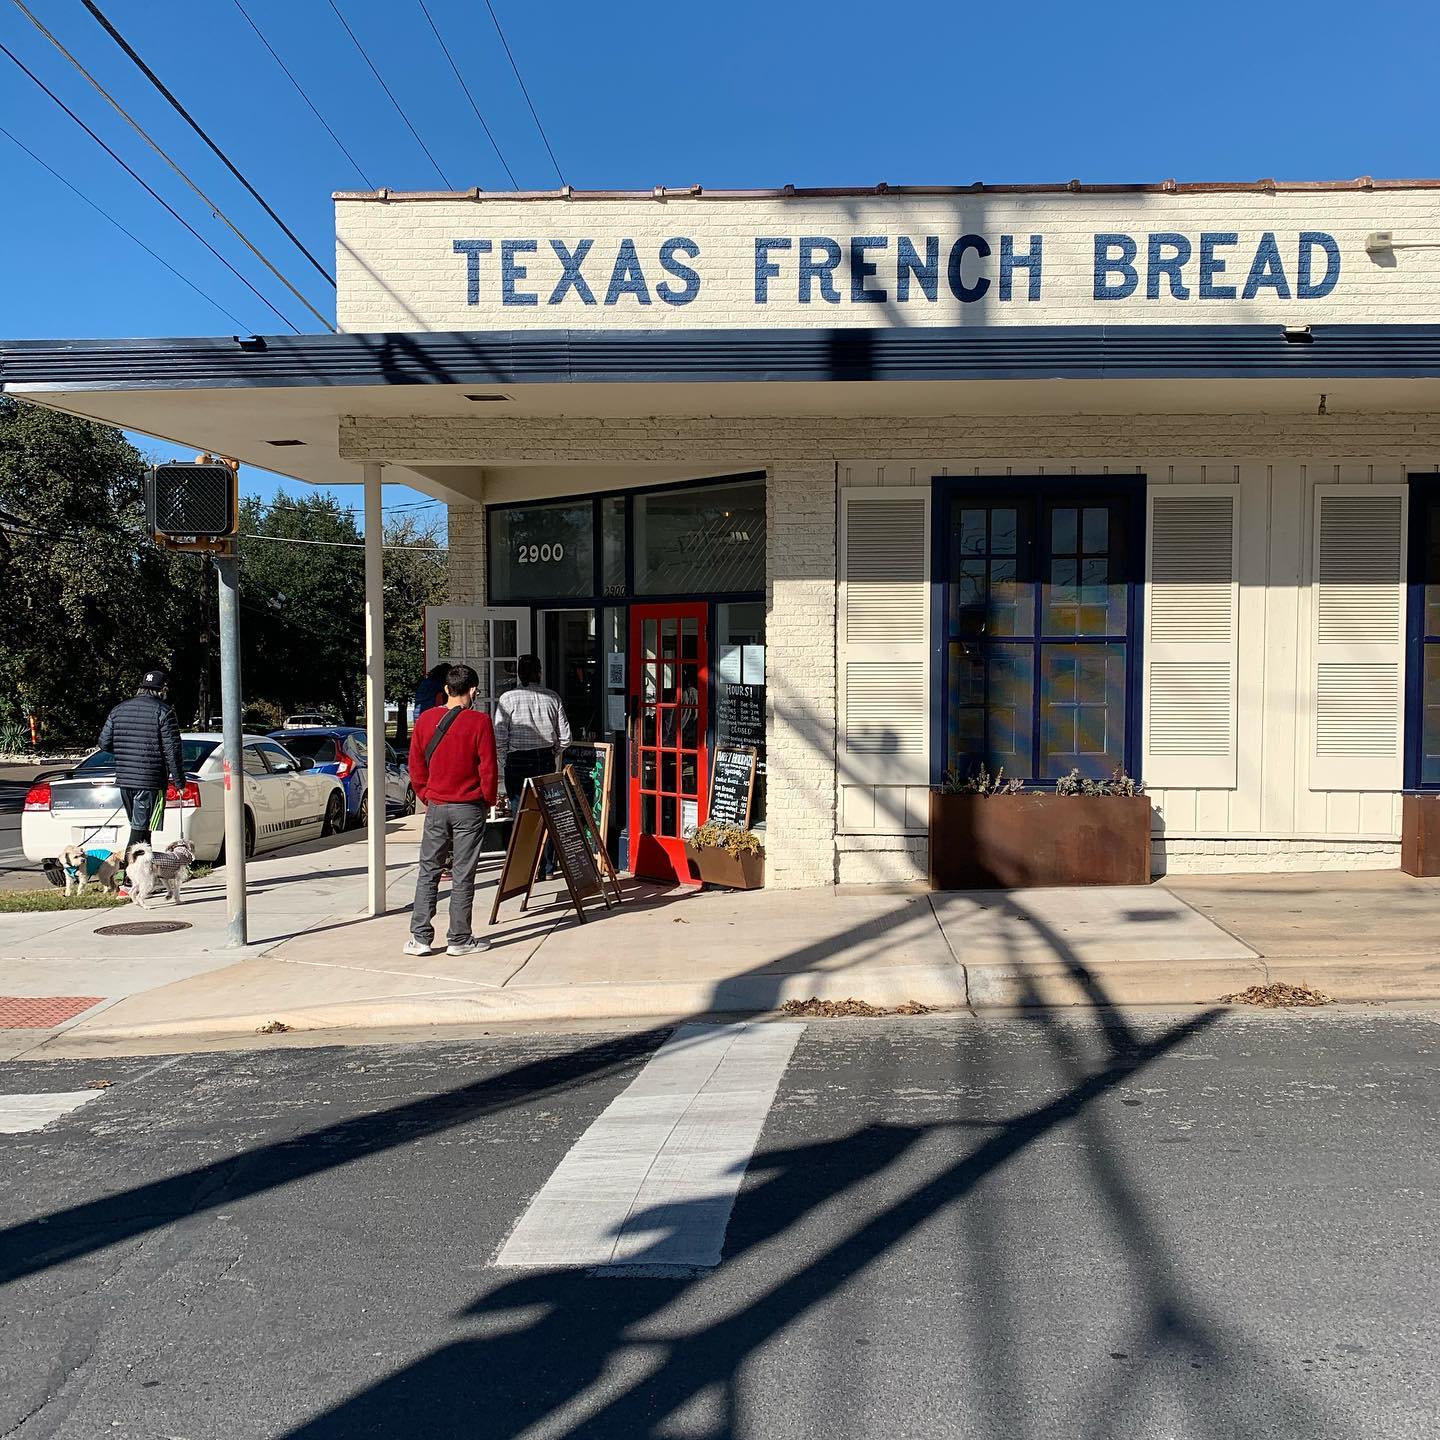 A restaurant building with the name “Texas French Bread” on top, and people are  waiting to enter.